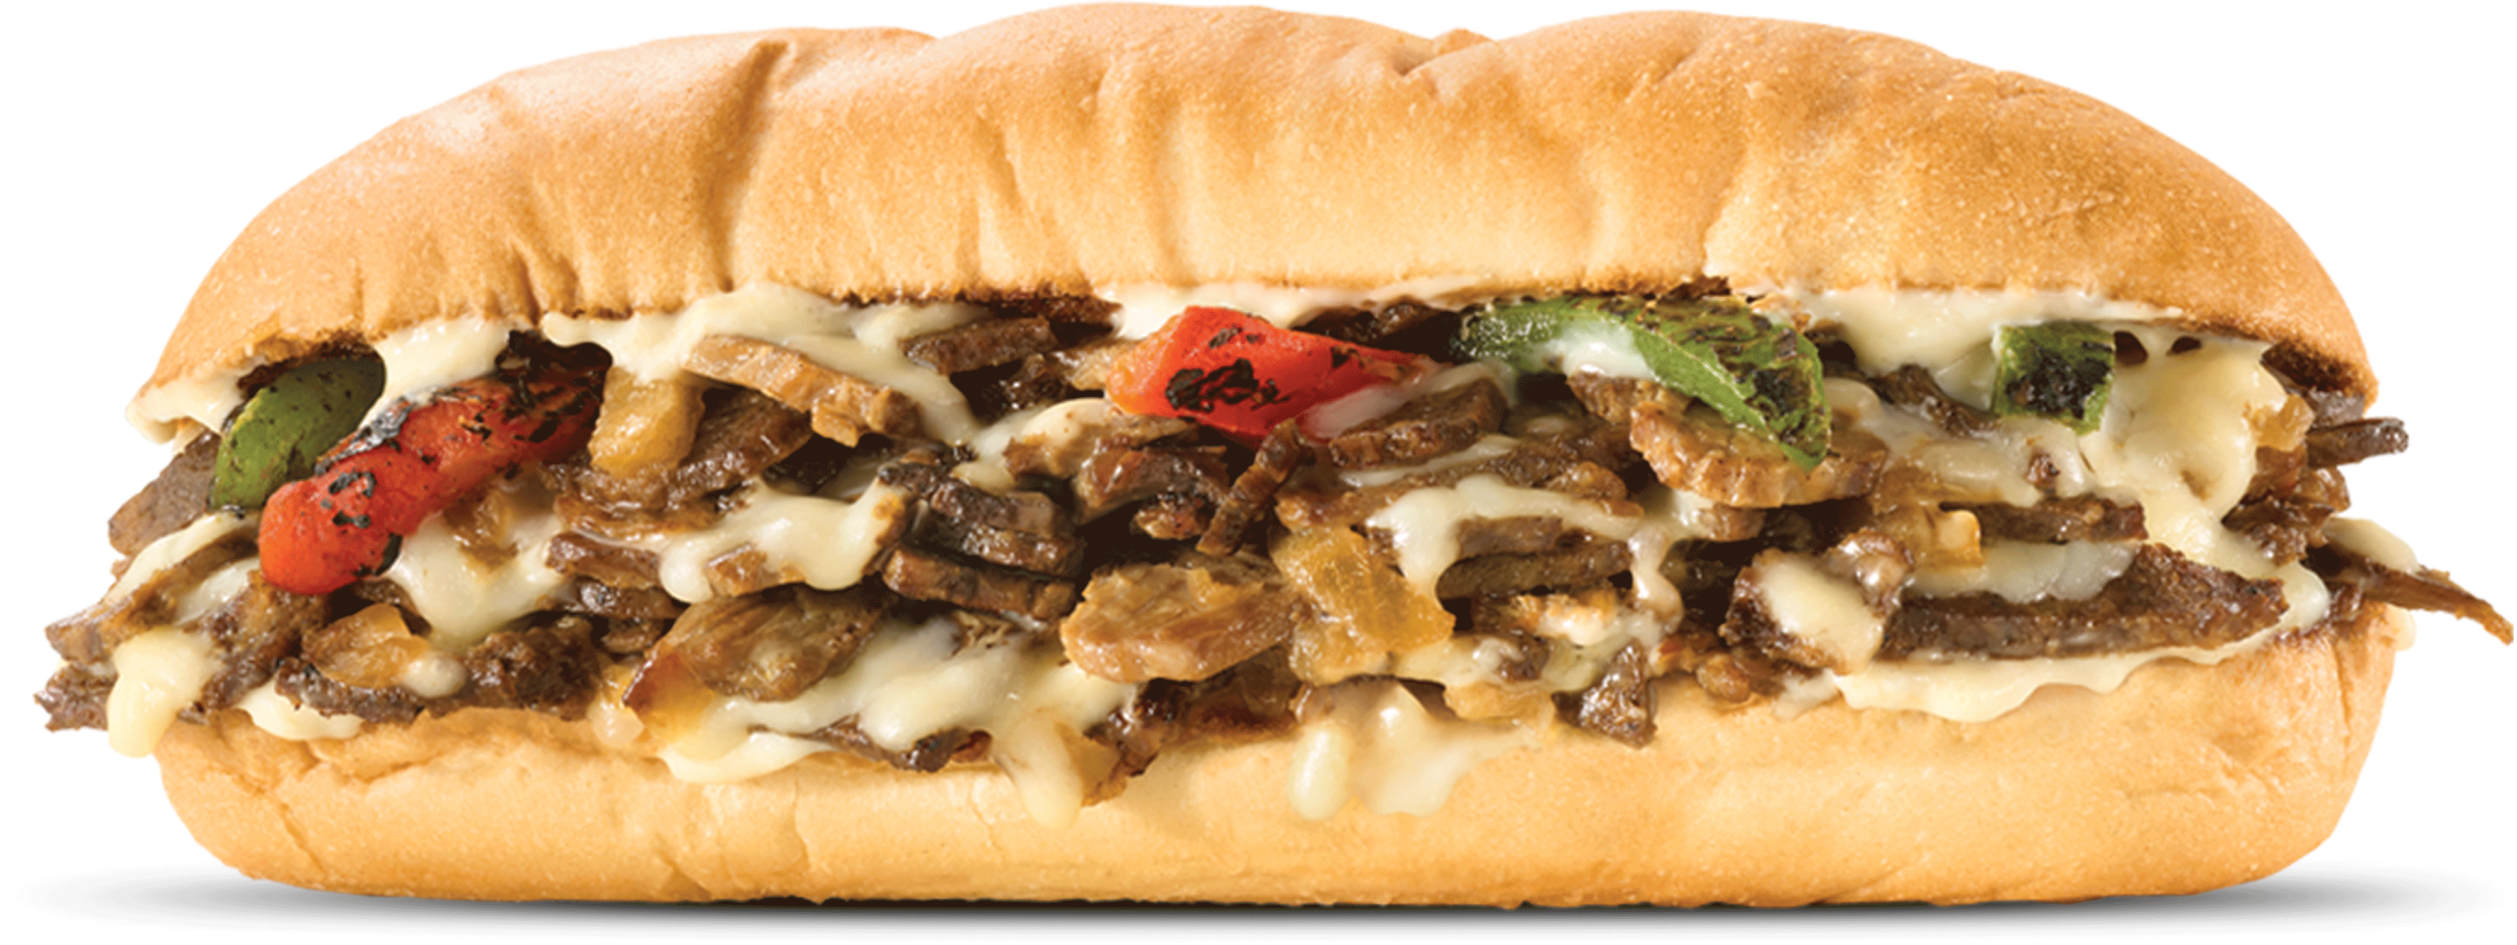 Arby's Classic Cheesesteak Nutrition Facts